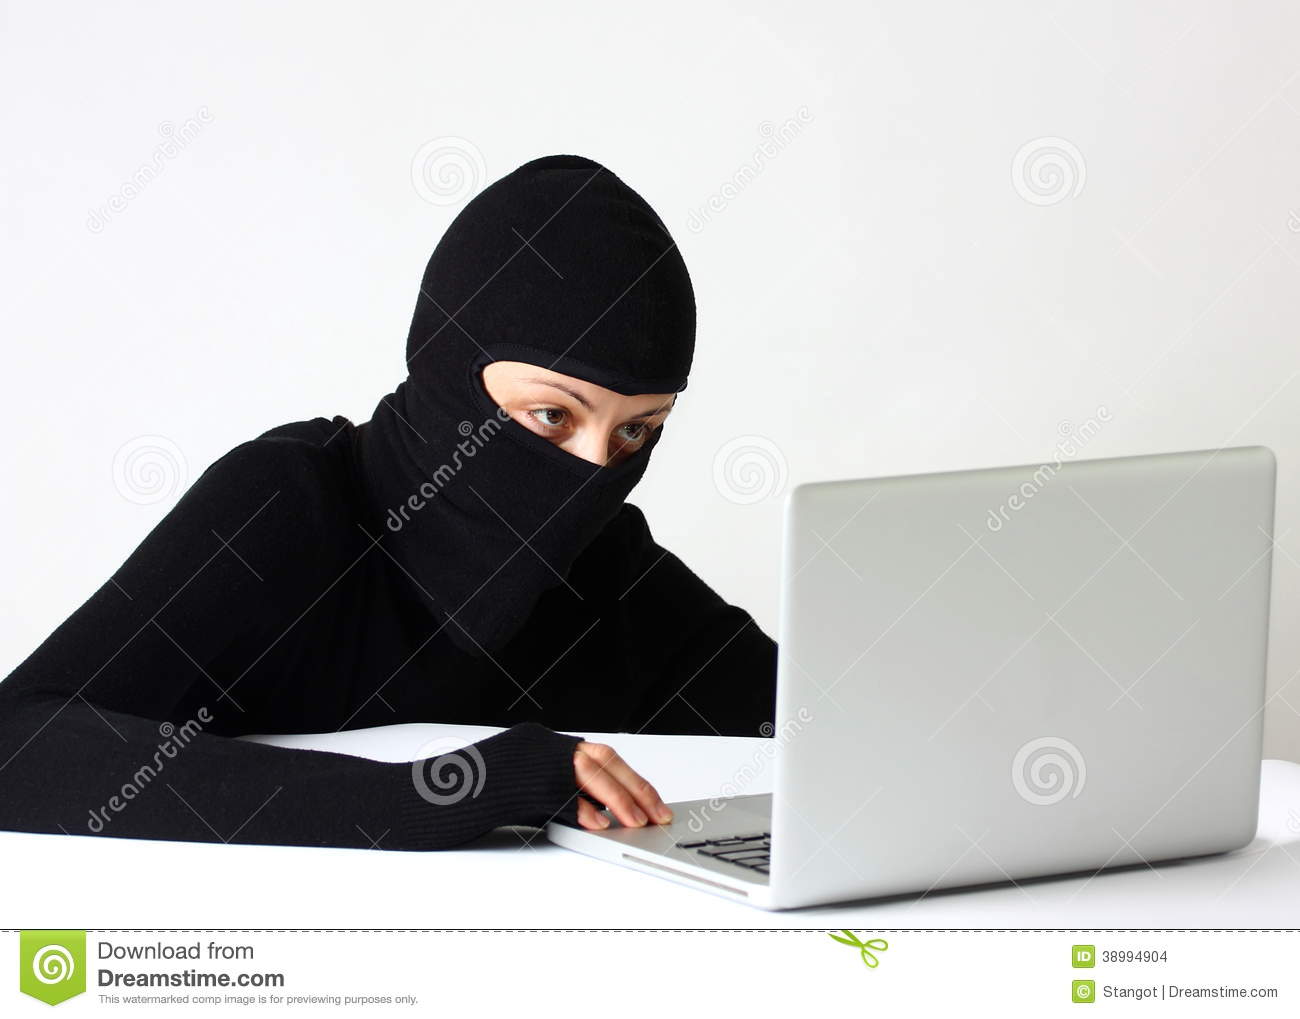 Female Hacker With Laptop Isolated On A White Background